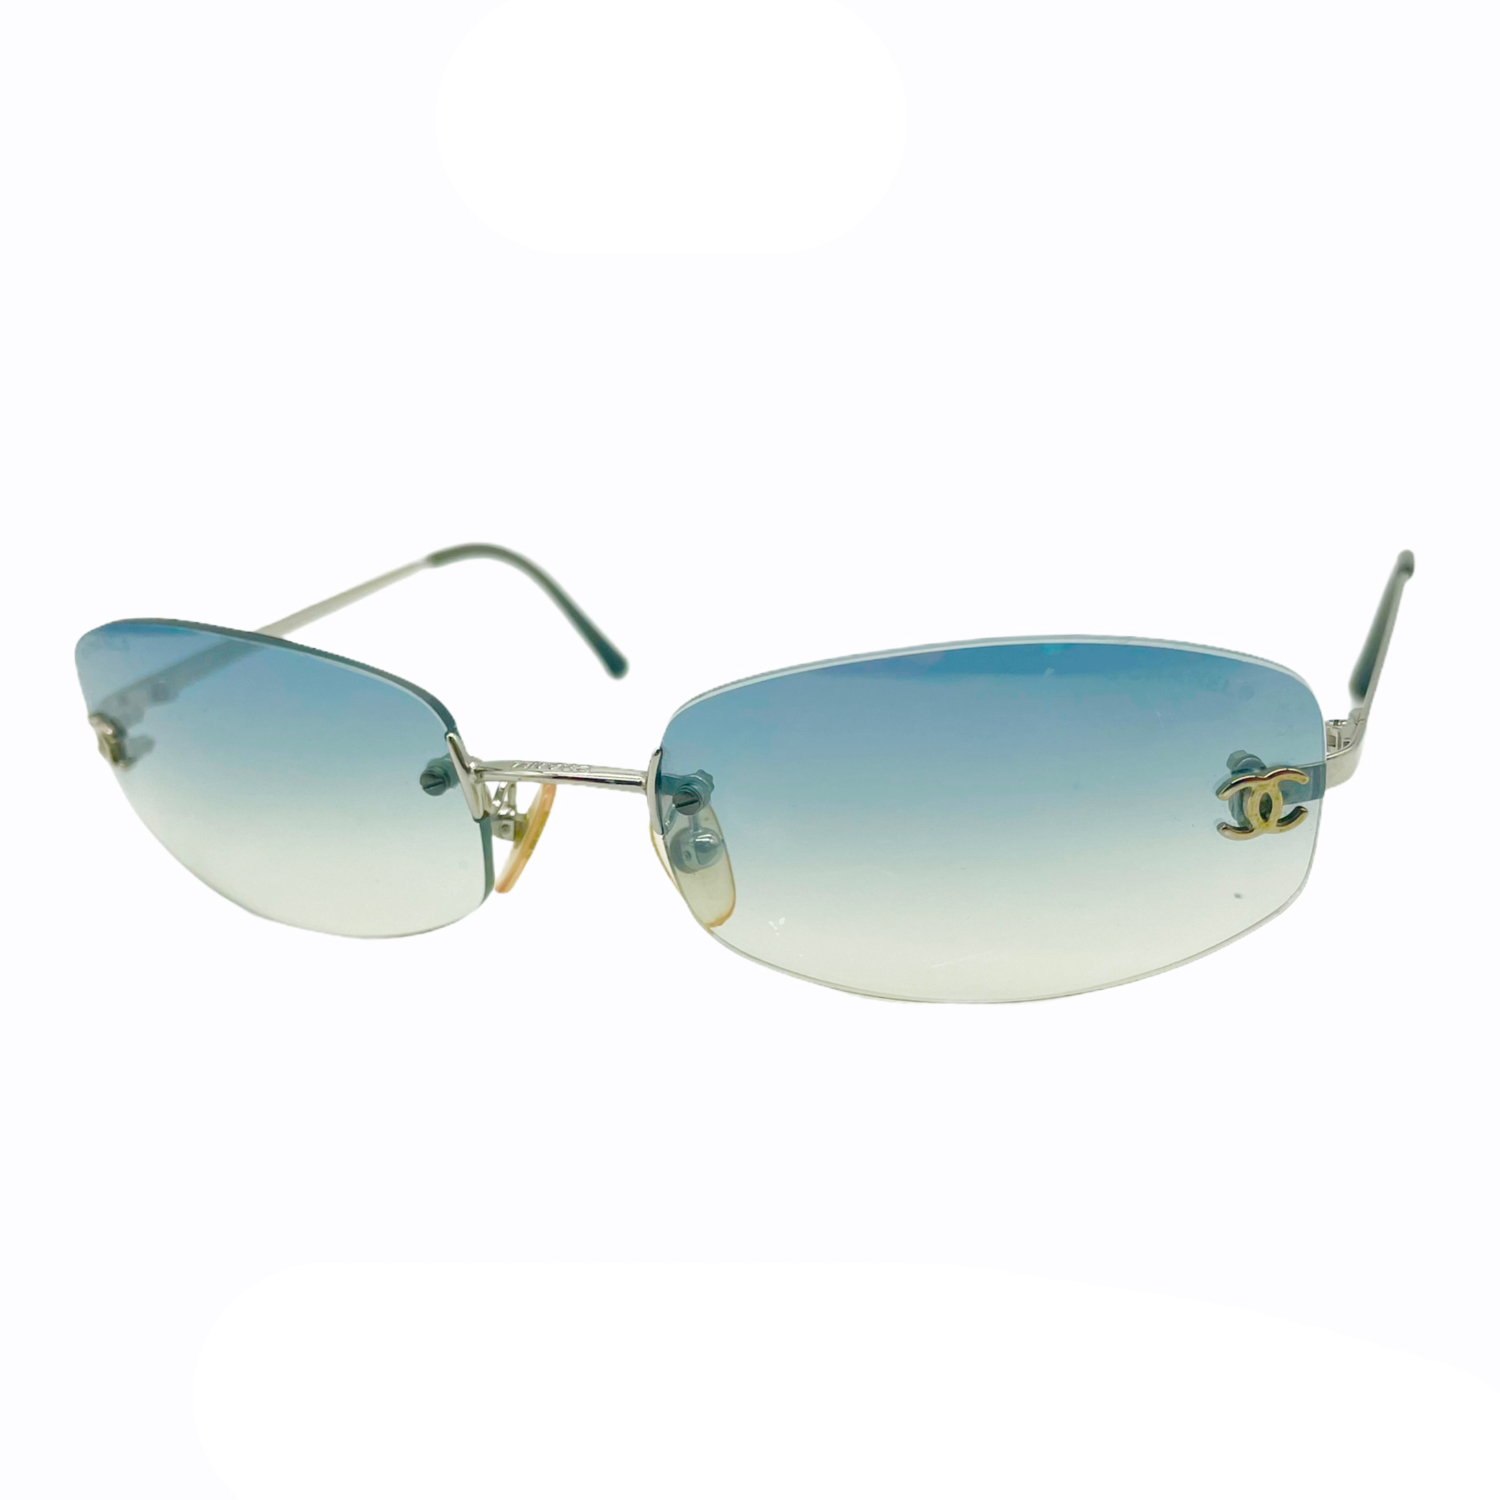 Chanel Rimless Ombre Sunglasses in Baby Blue